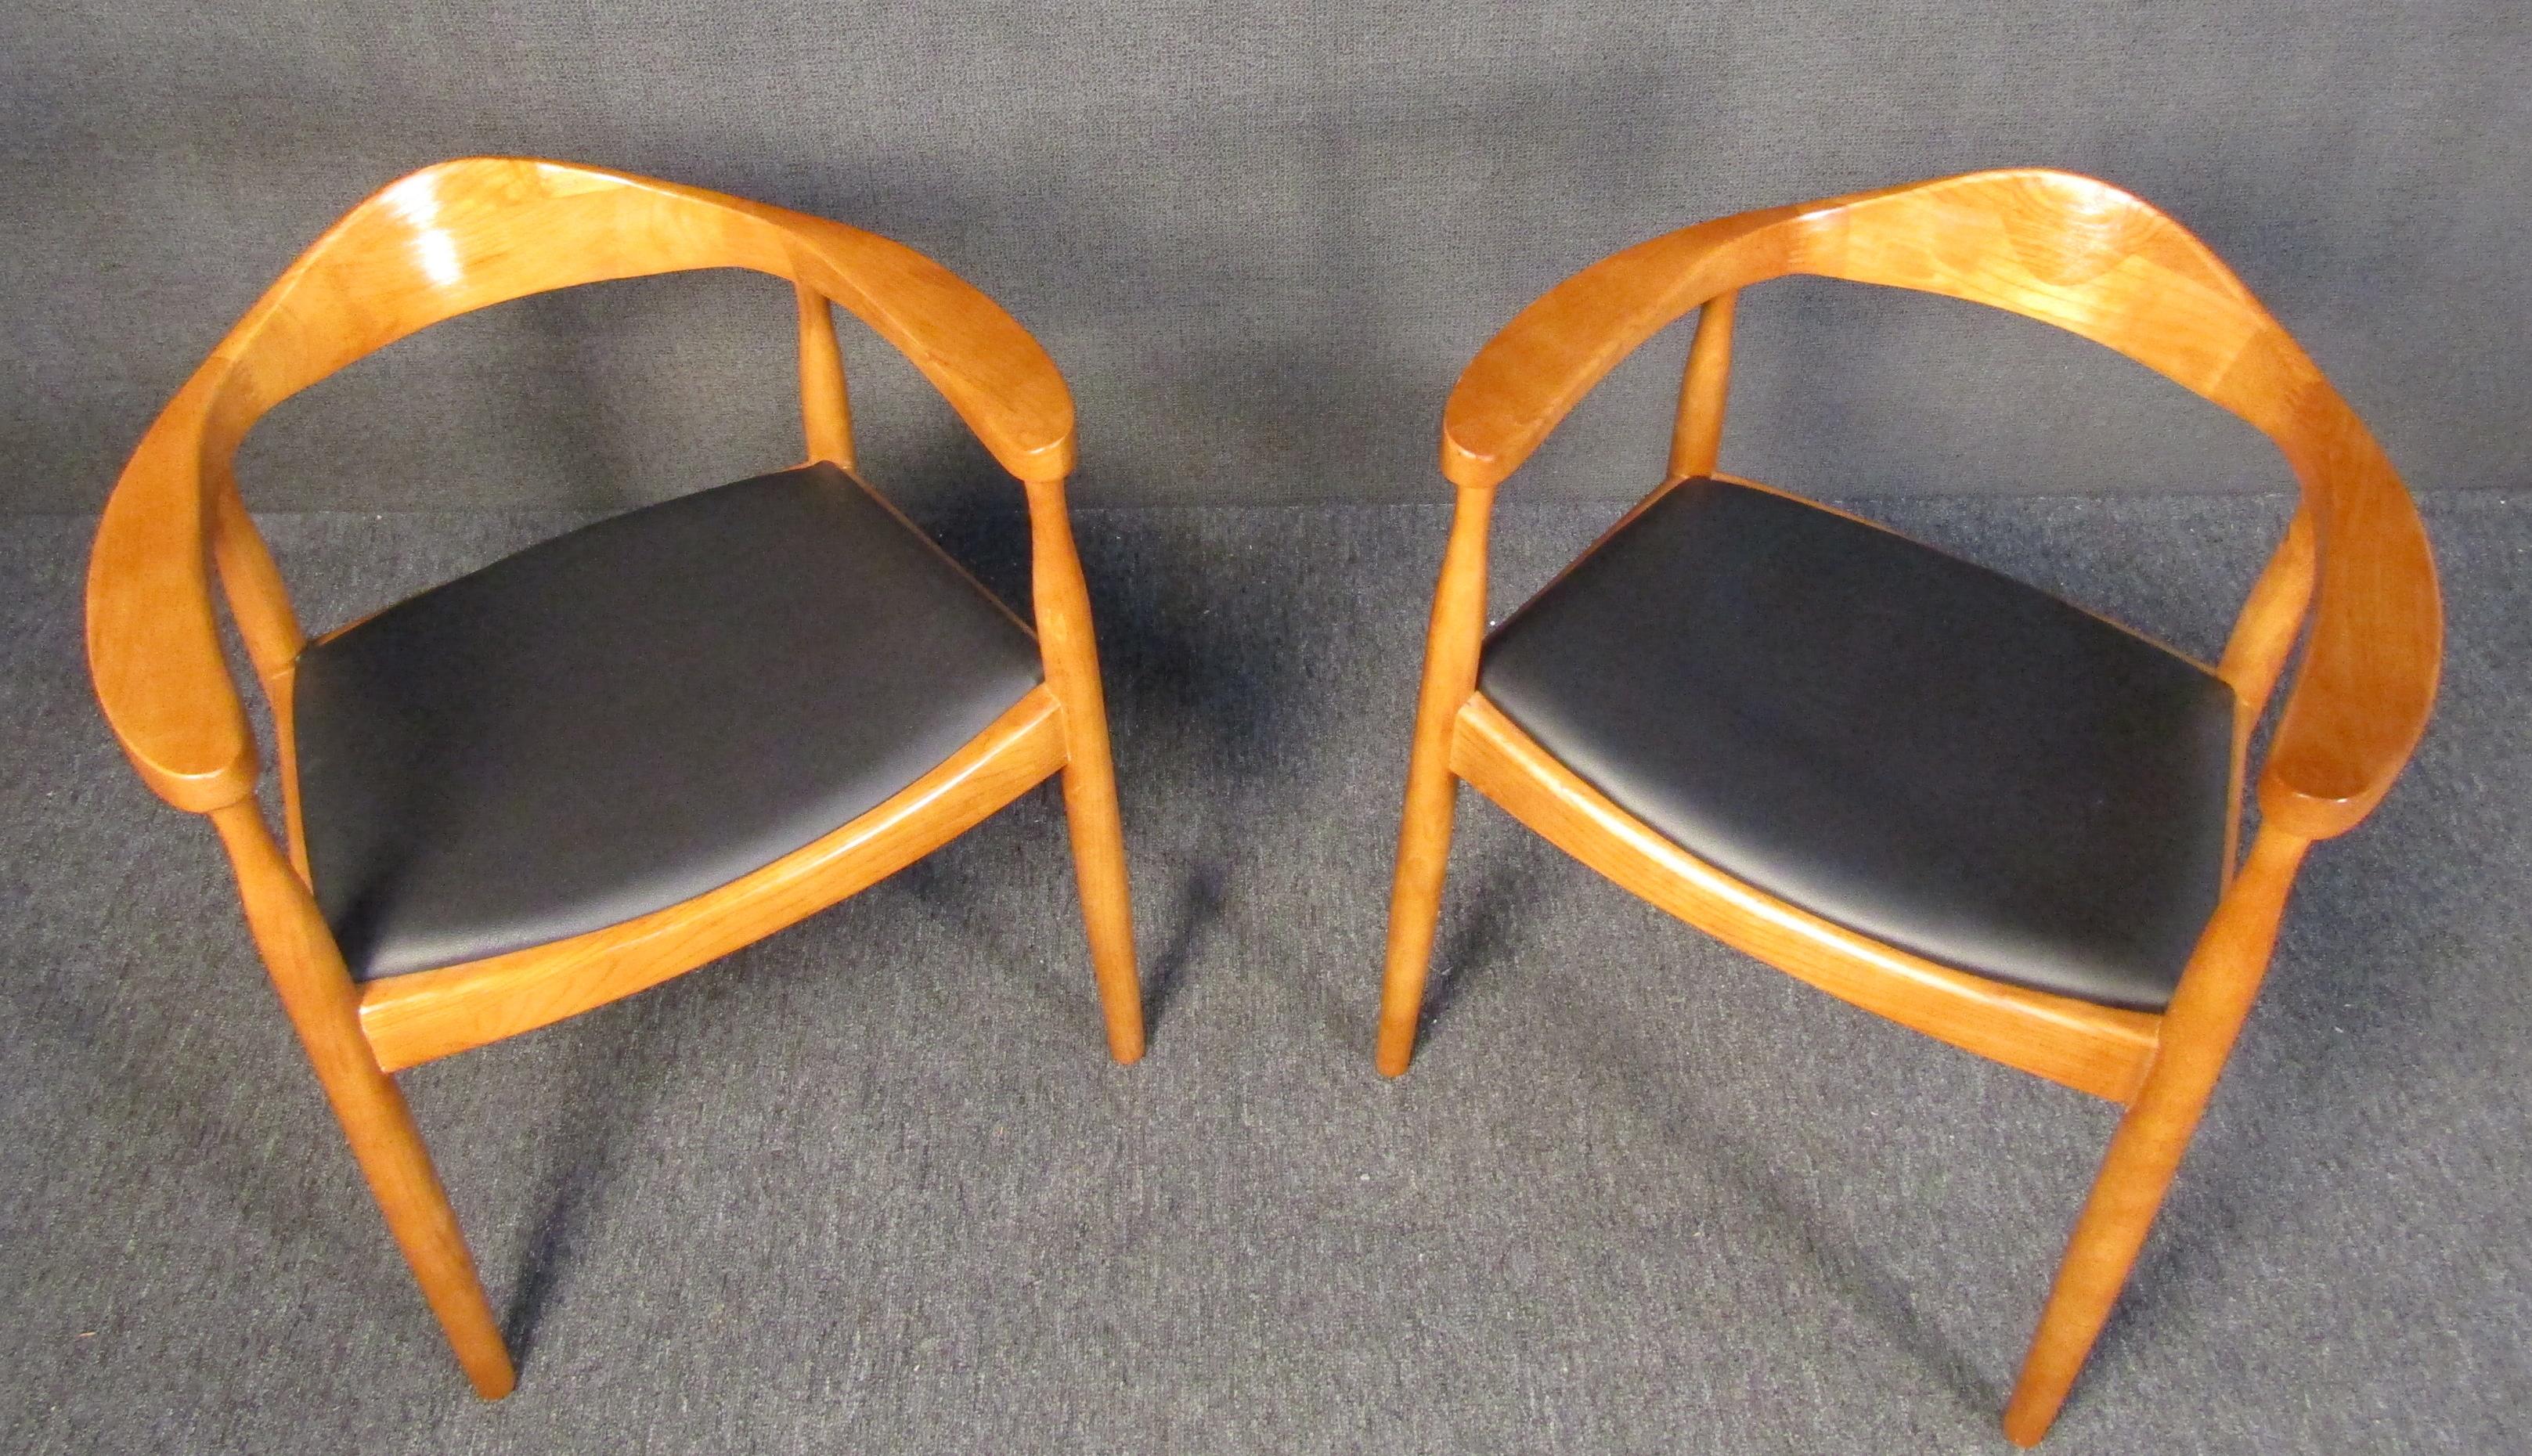 Set of Danish armchairs. These chairs are in very good condition and would make an excellent addition to any collection.

Dimensions: W: 25